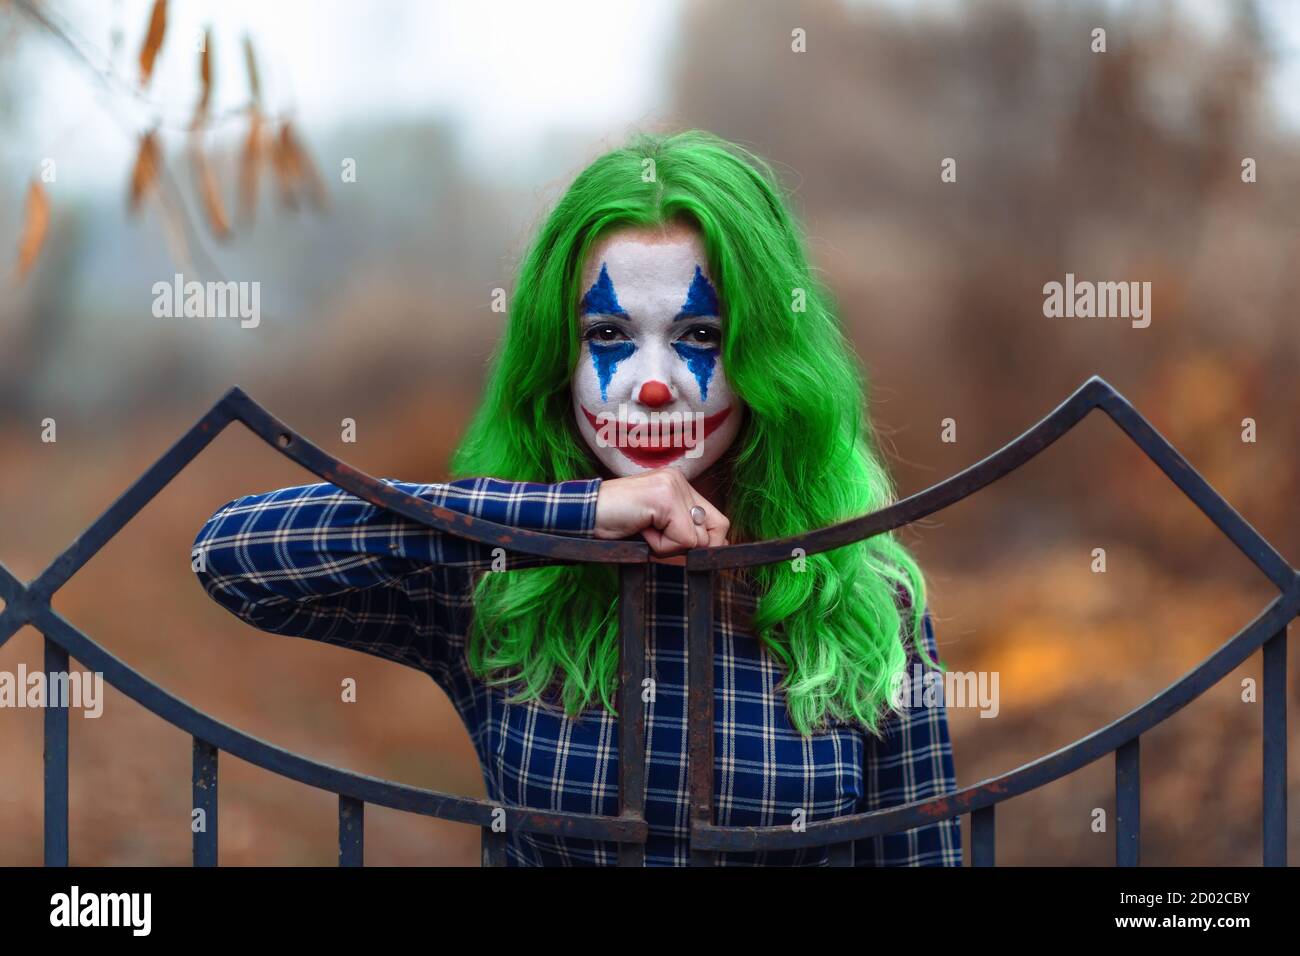 Portrait of a greenhaired girl in chekered dress with joker makeup ...